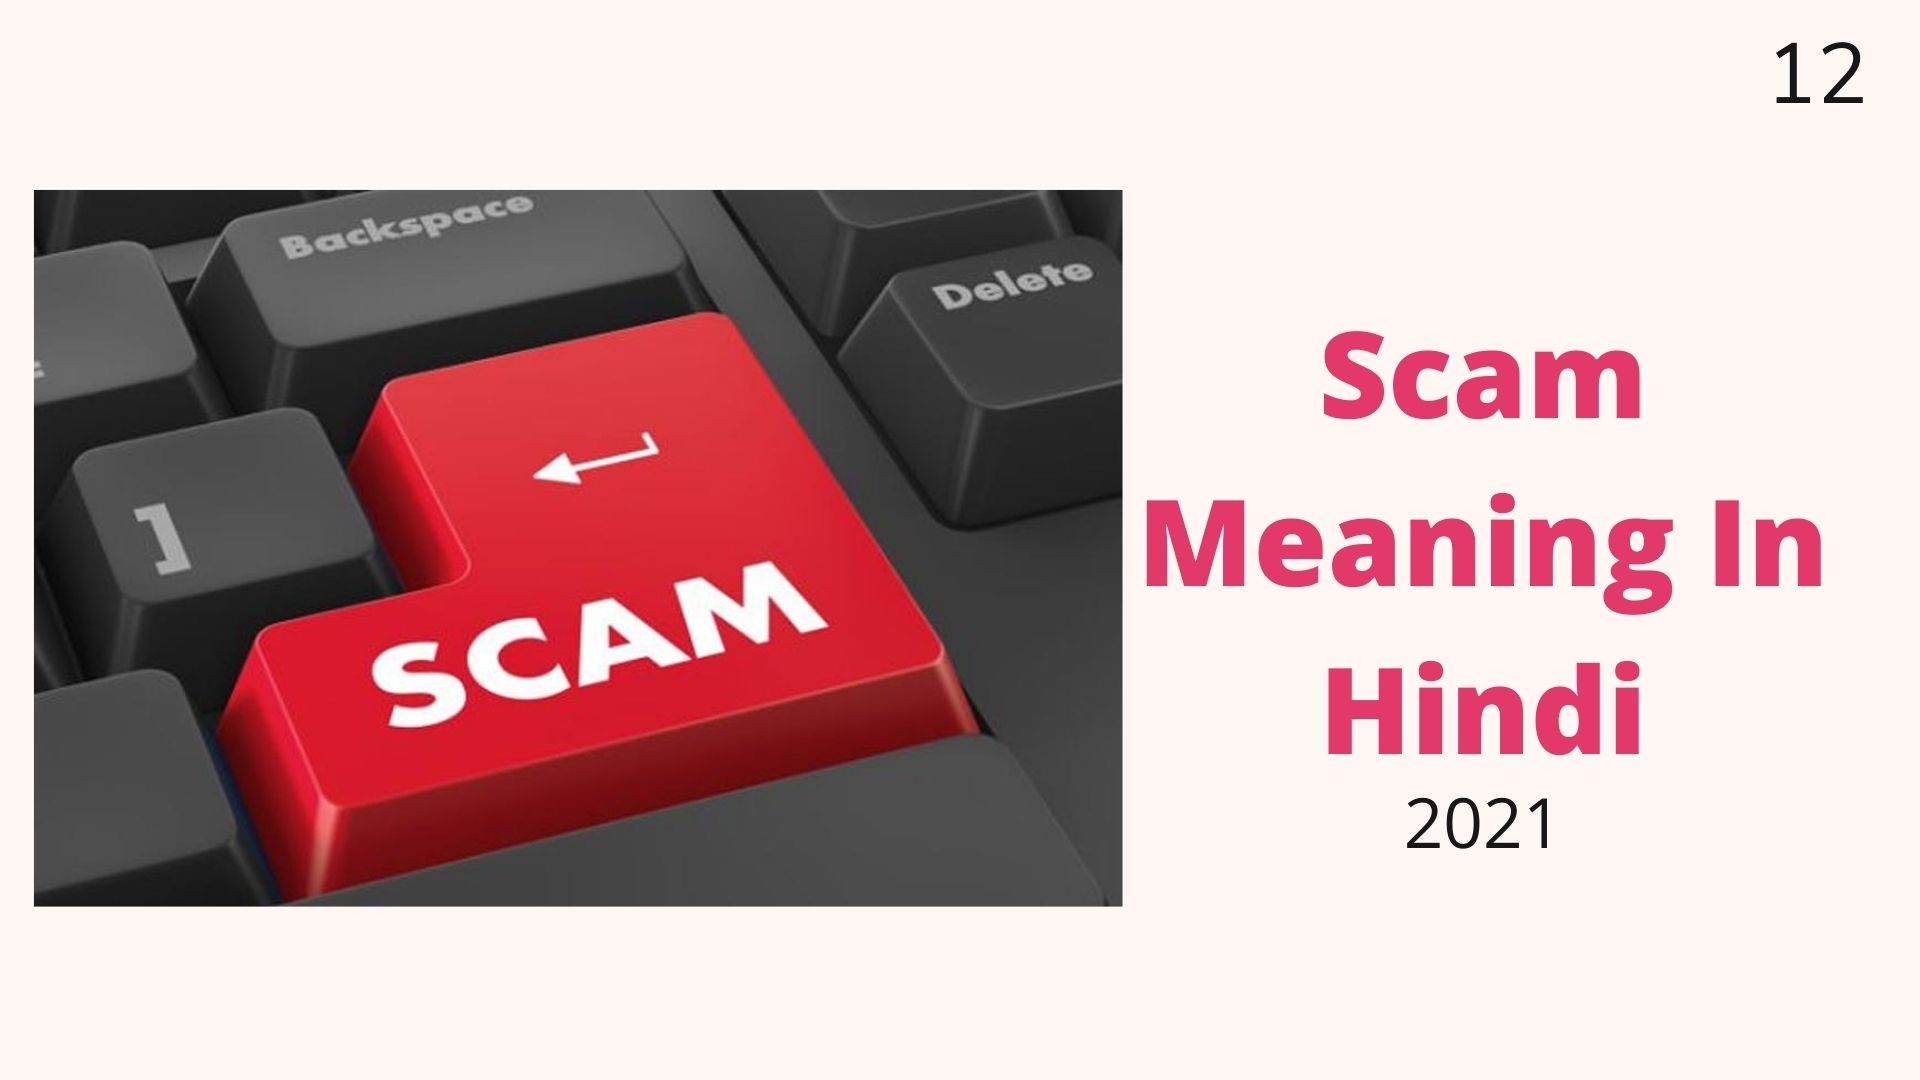 Scam Meaning In Hindi